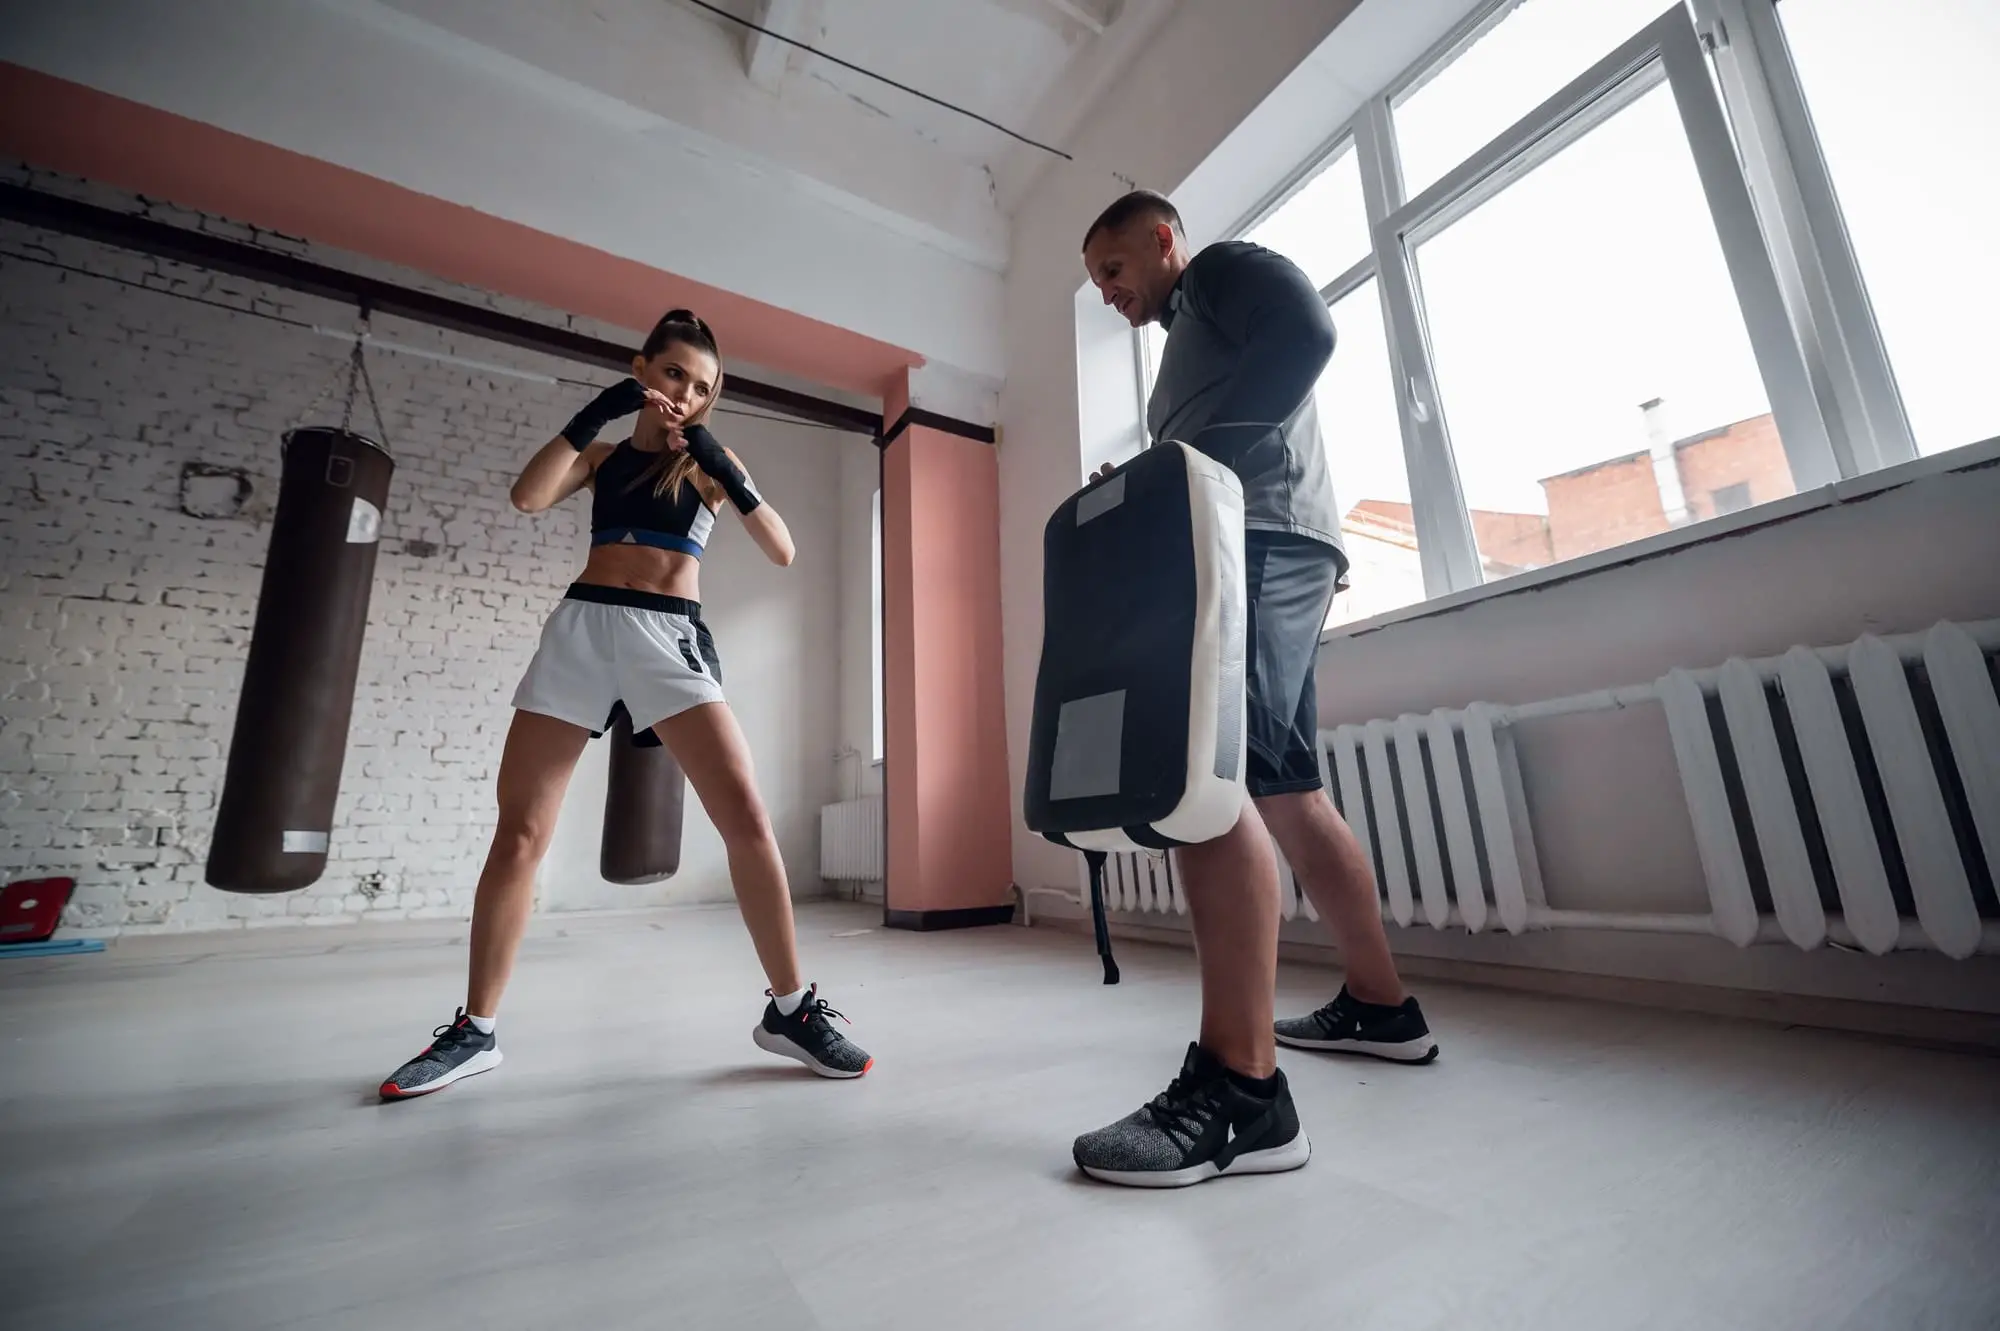 Training fight of male and female kickboxers. Practicing kicks and strikes on the boxing paw